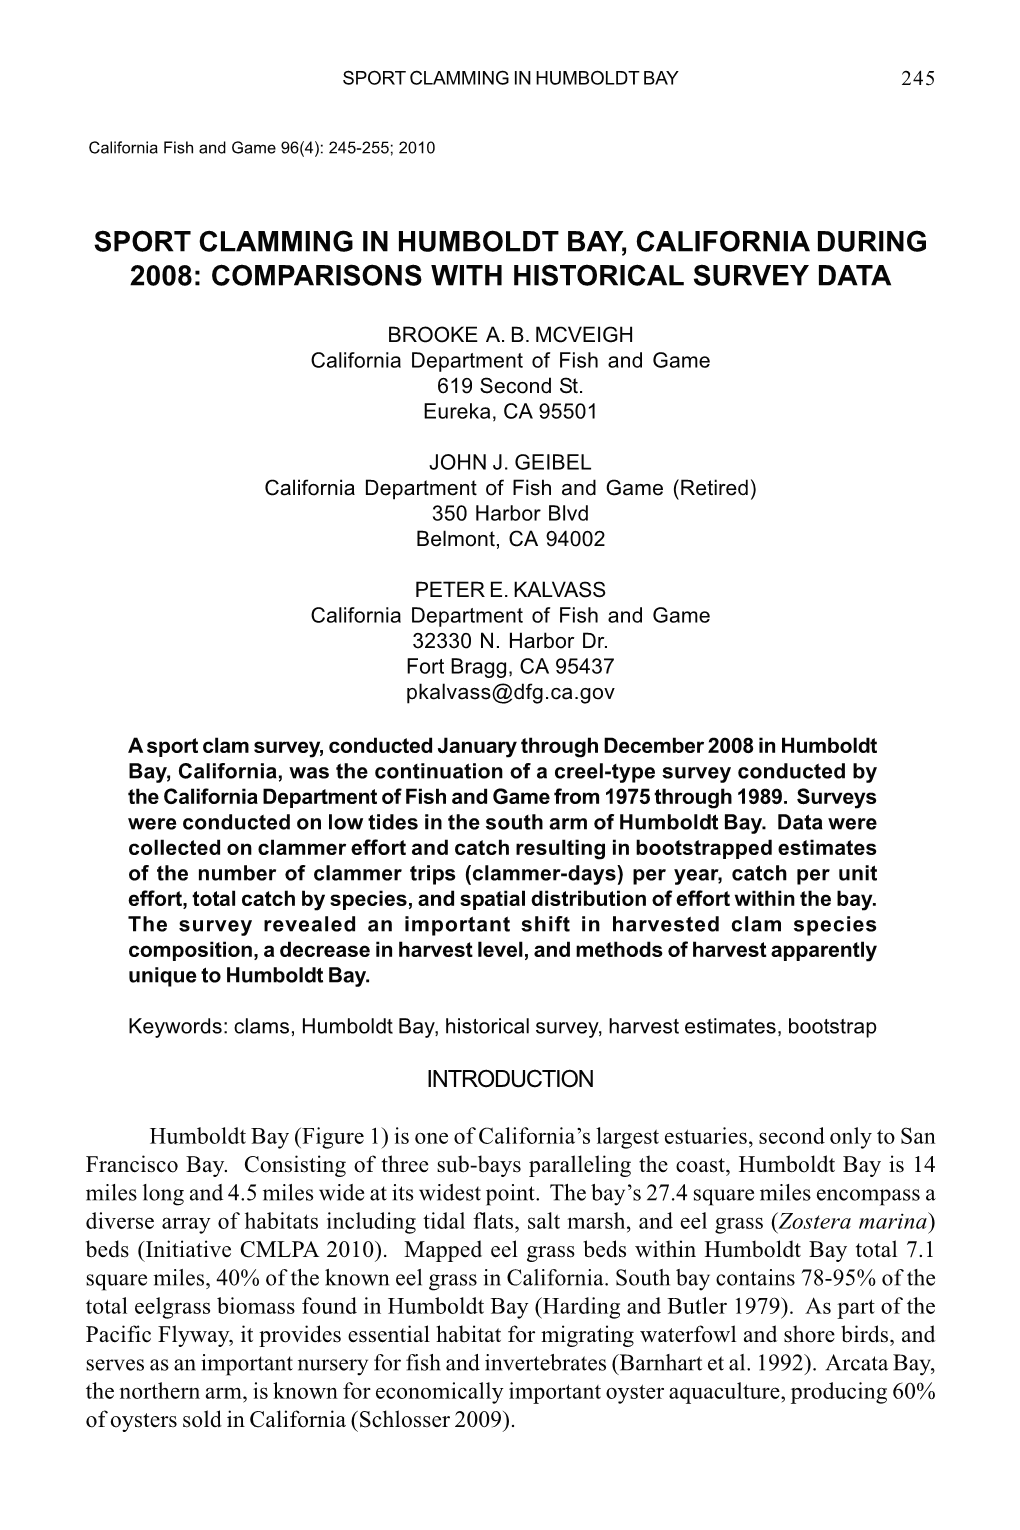 Sport Clamming in Humboldt Bay, California During 2008: Comparisons with Historical Survey Data